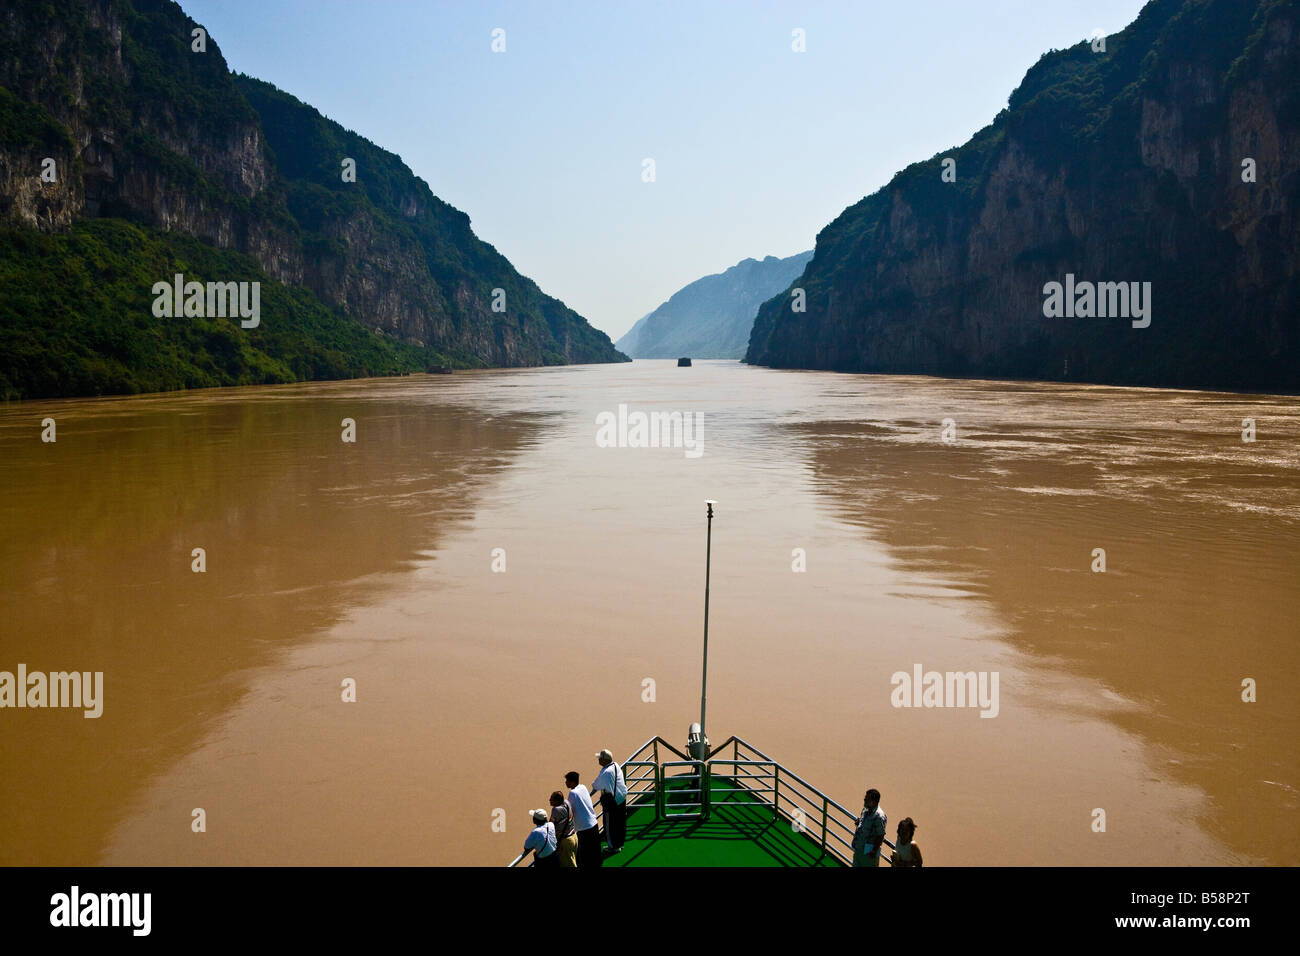 Xiling Gorge Yangzi River between Sandouping and Yichang downstream from Three Gorges Dam China JMH3456 Stock Photo